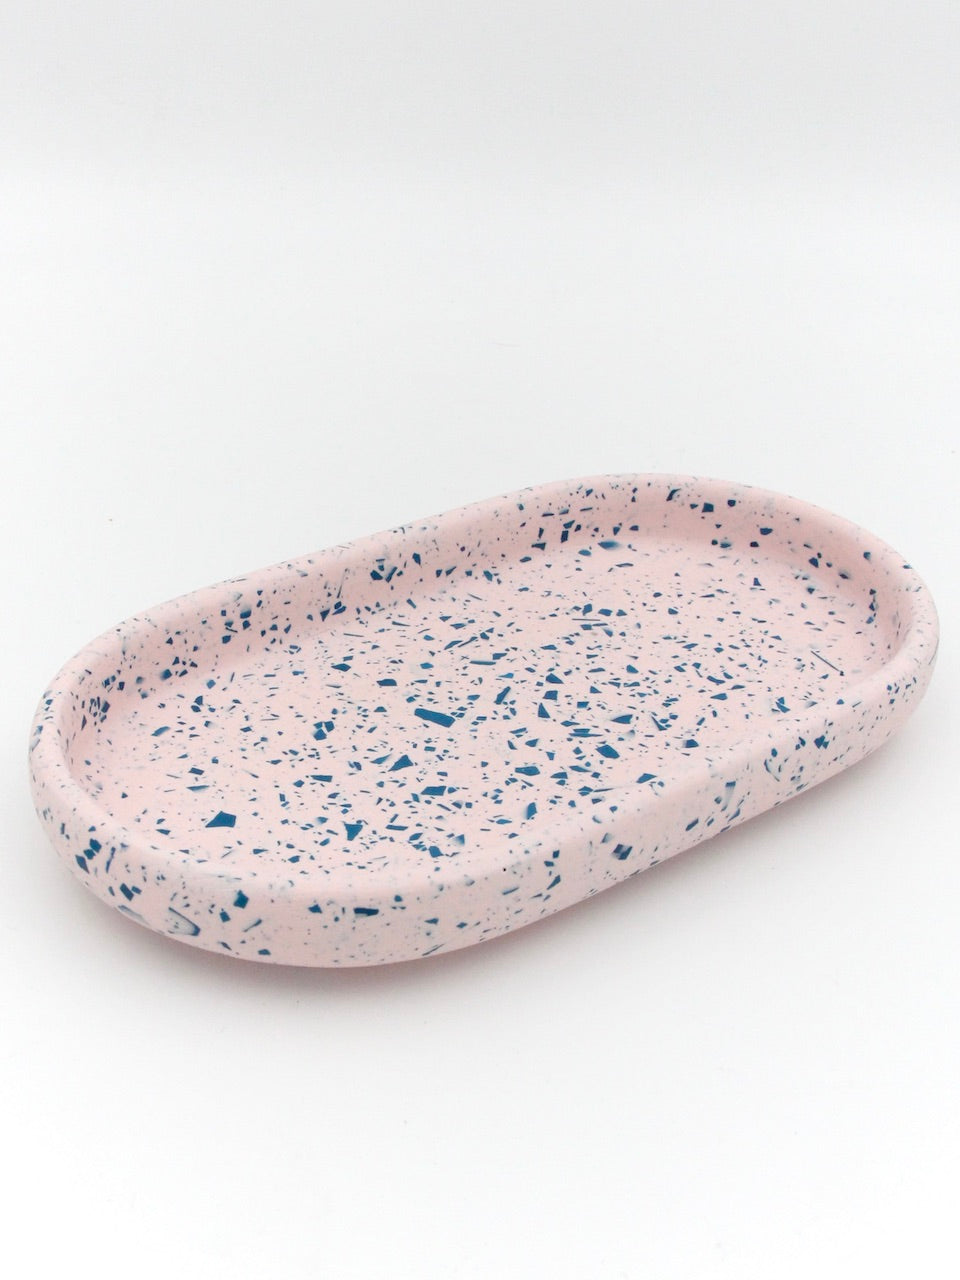 Decoration tray - Pink with blue terrazzo